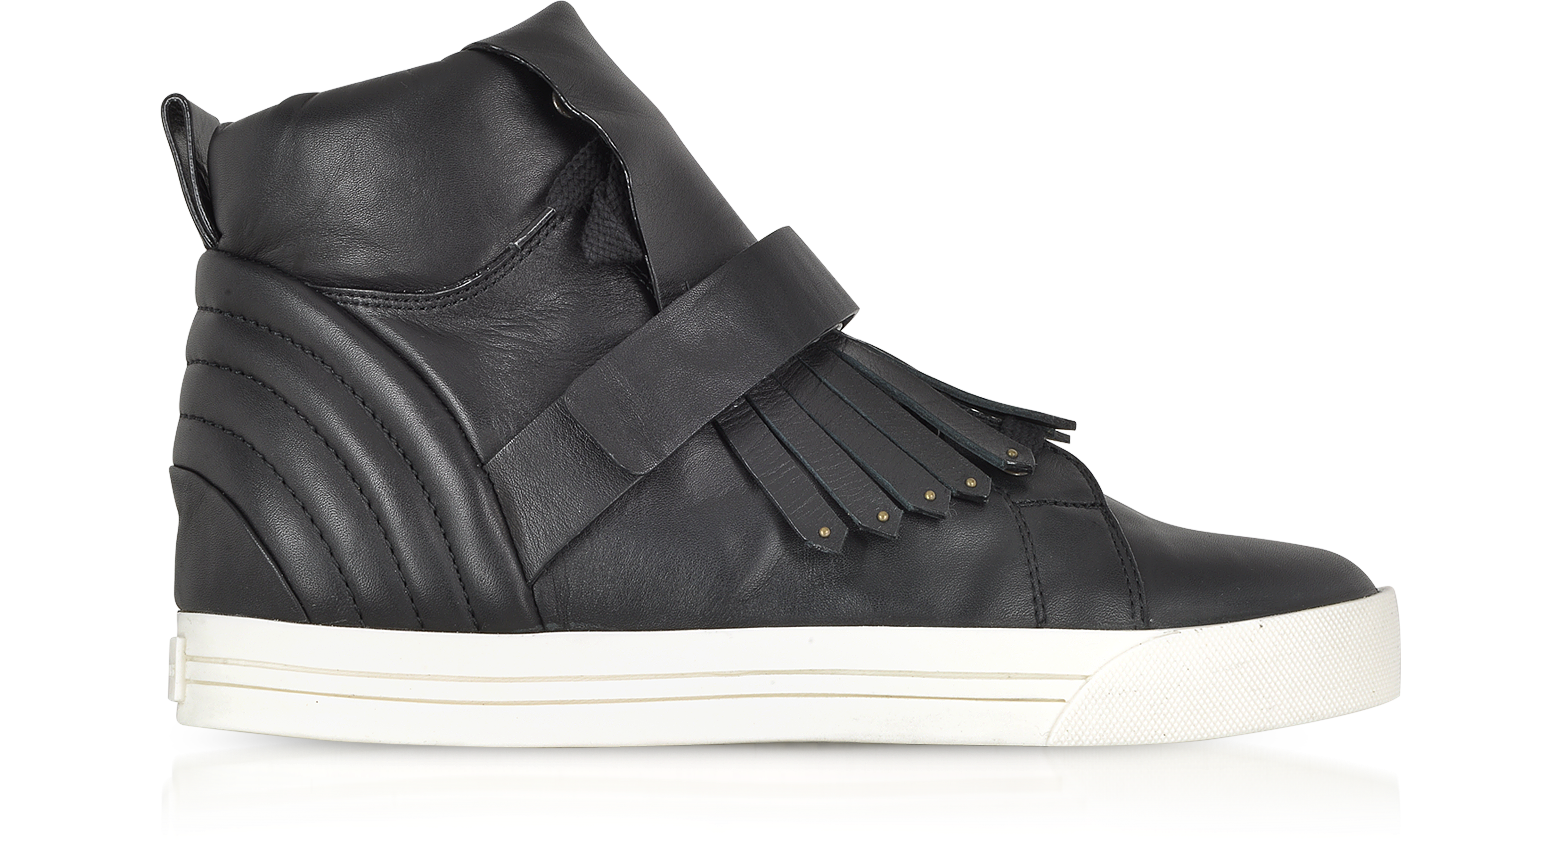 Marc Jacobs Black High Top Fringed Leather Sneaker 35 IT/EU at FORZIERI